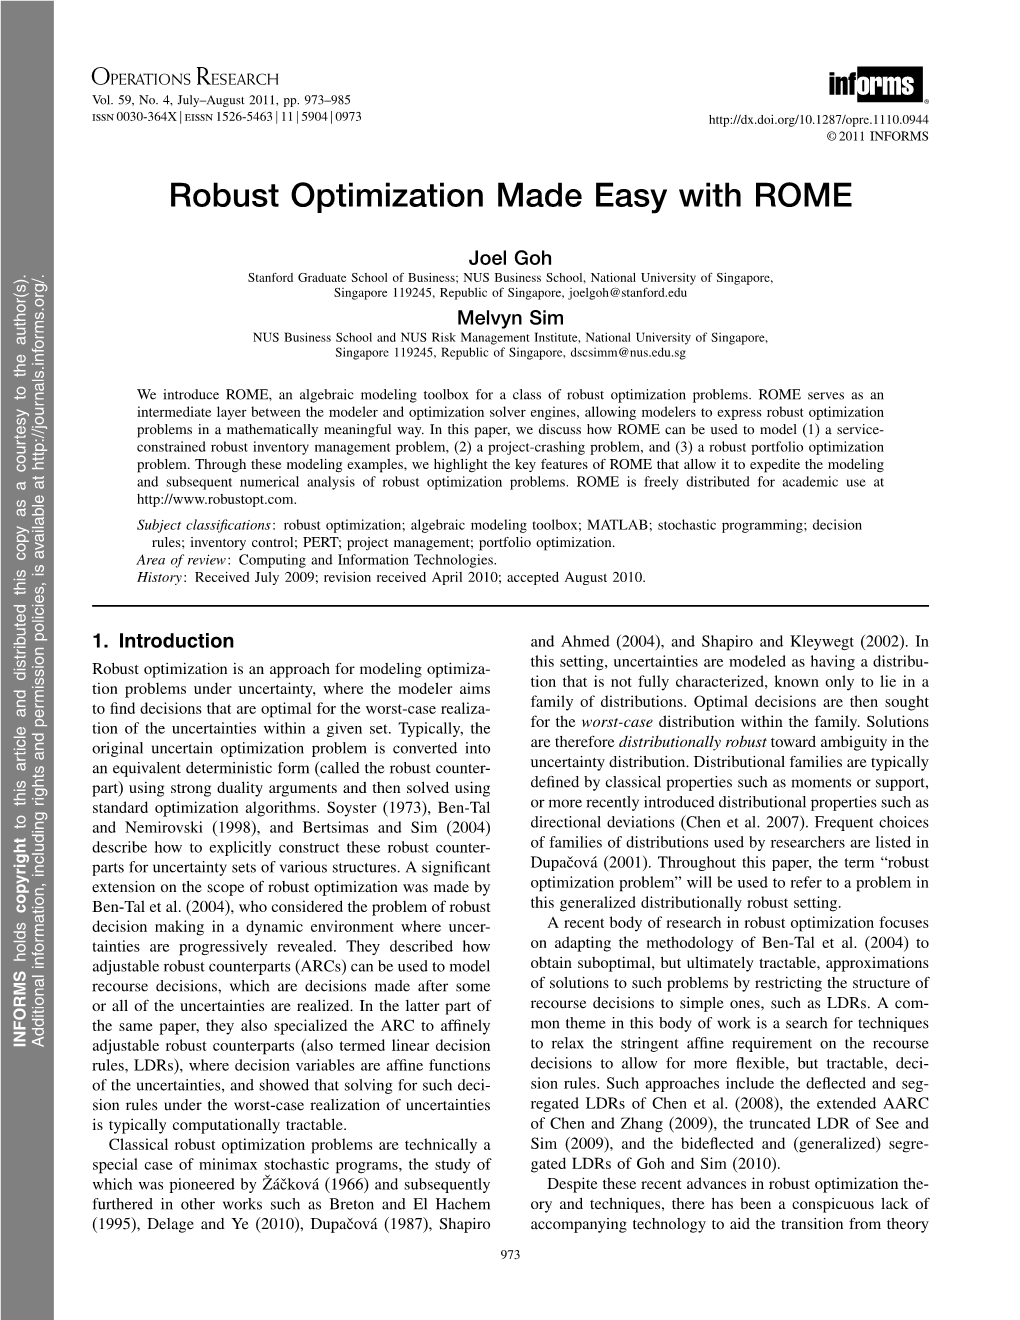 Robust Optimization Made Easy with ROME